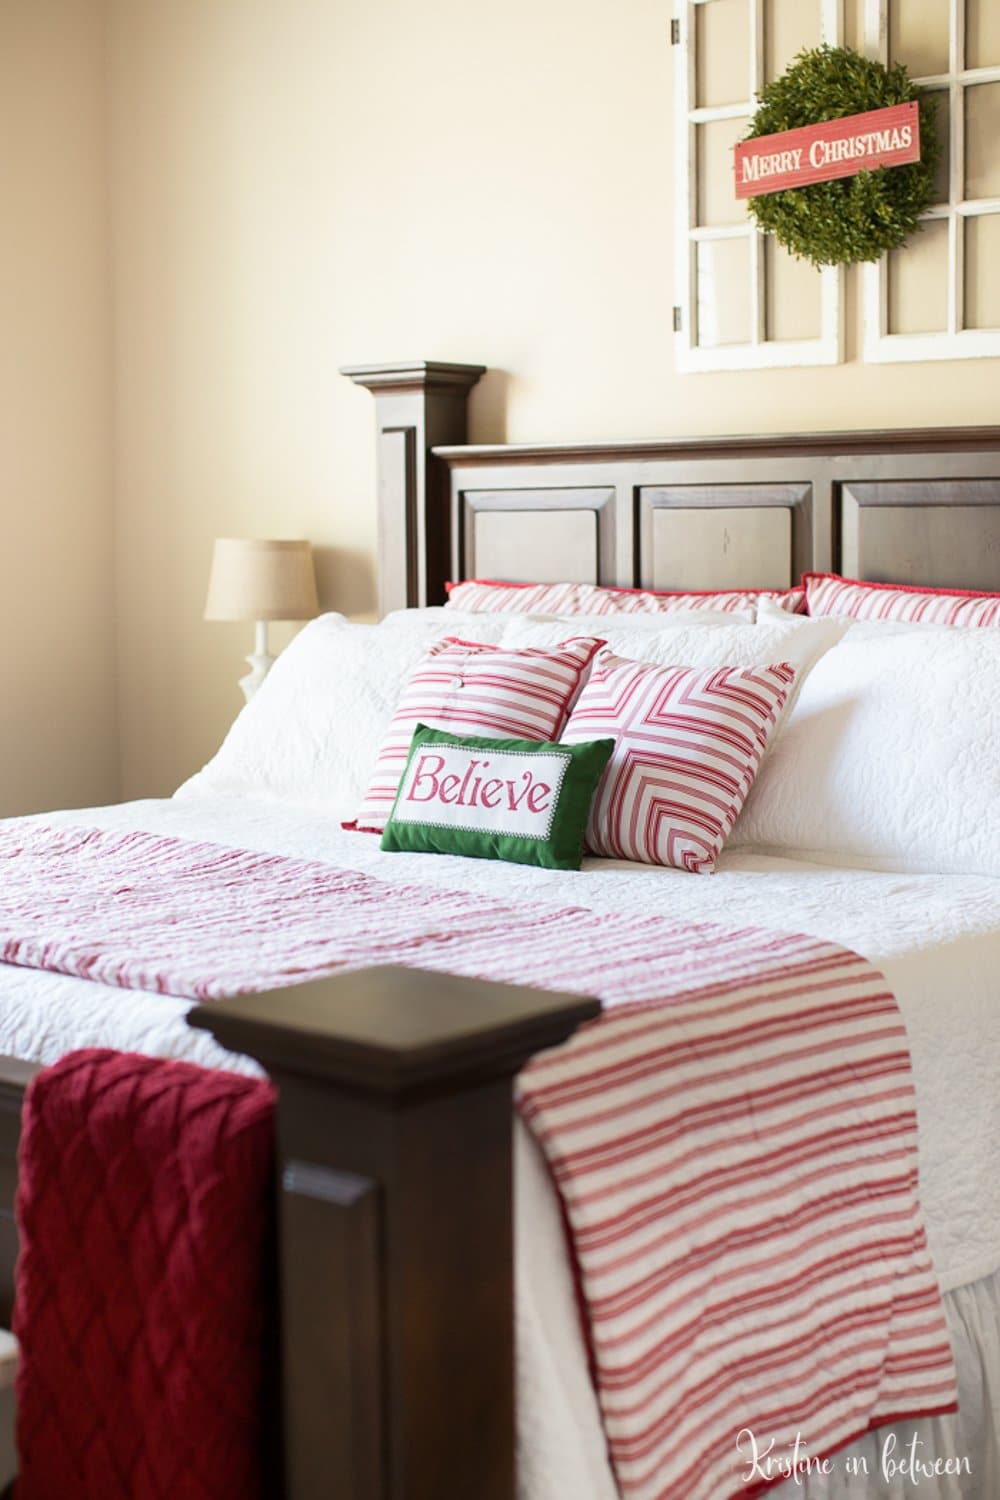 A wooden bed with read and white bedding and a wreath with a Merry Christmas sign hanging above it.